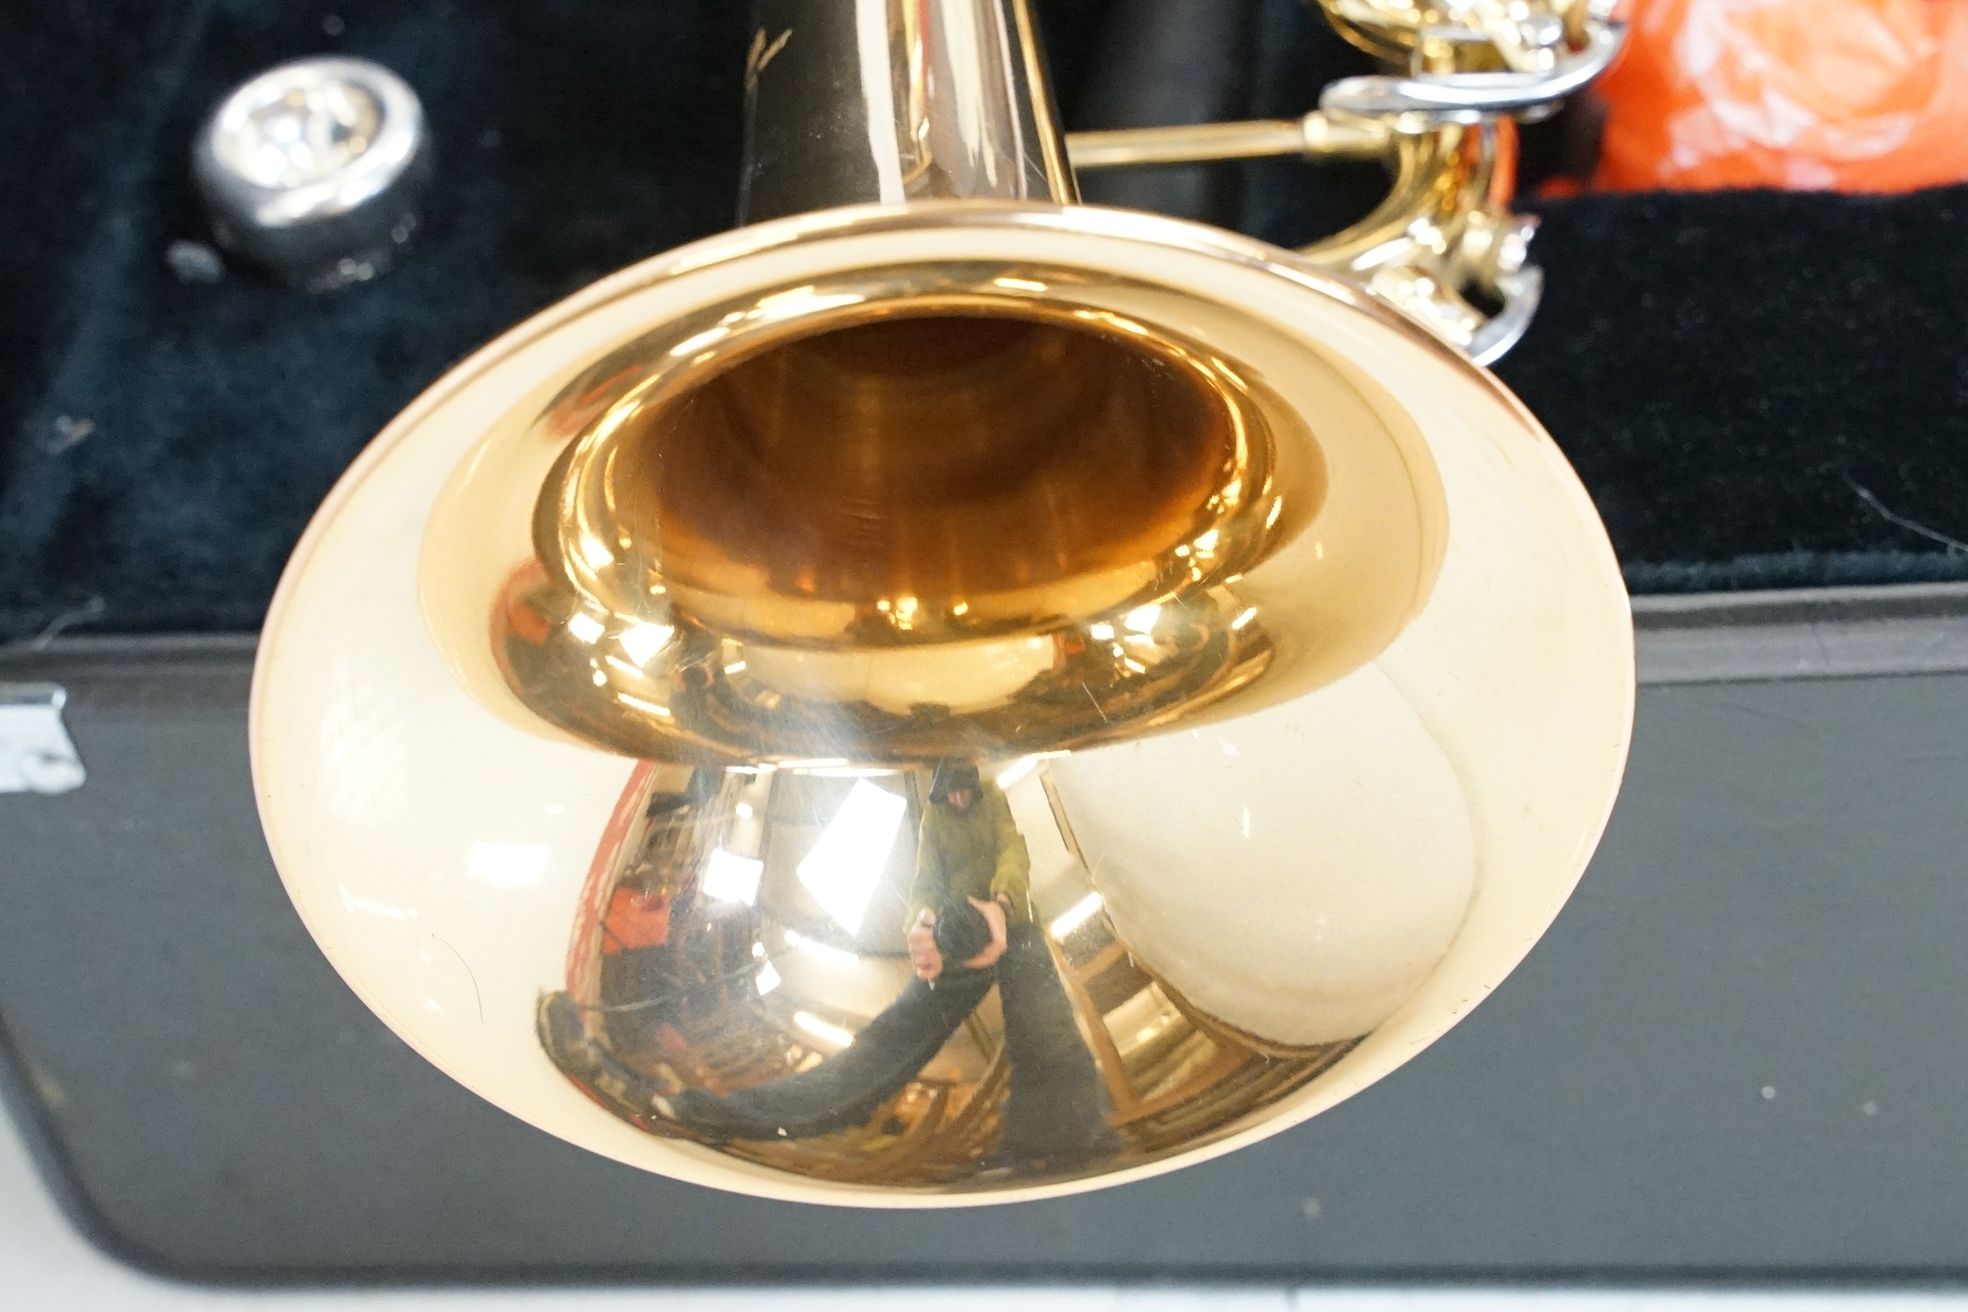 Yamaha YTR 43356 brass trumpet, serial no. 684174, with mouthpiece, in fitted case. - Image 6 of 9